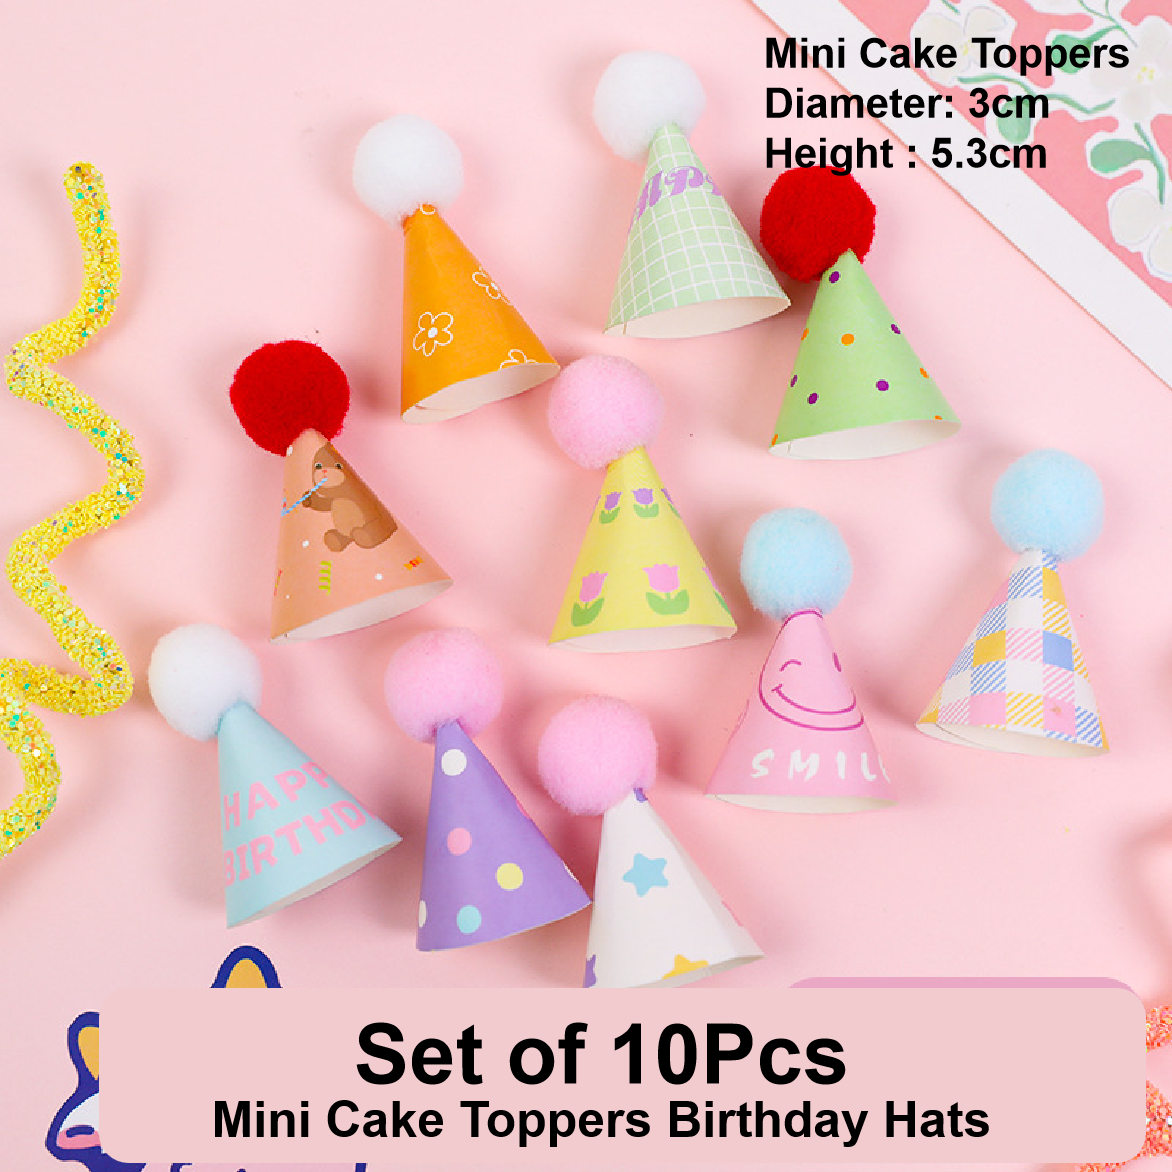 Cake Topper, Cupcake Decorations - Mini Cake Toppers Birthday Hats - Set of 10pcs